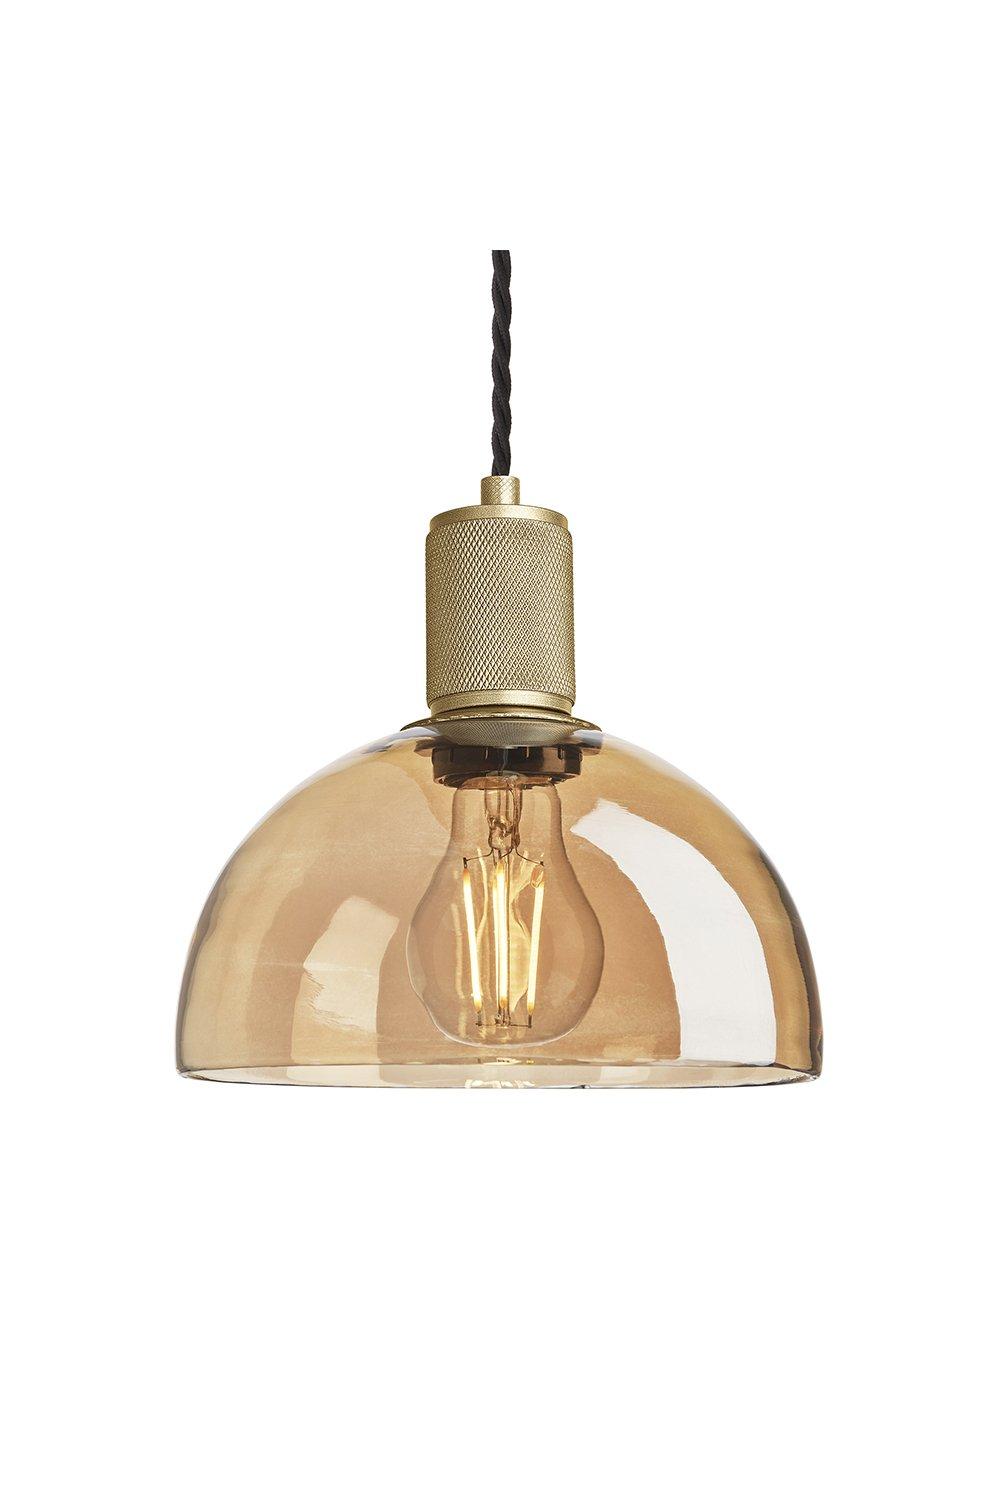 Knurled Tinted Glass Dome Pendant Light, 8 Inch, Amber, Brass Holder